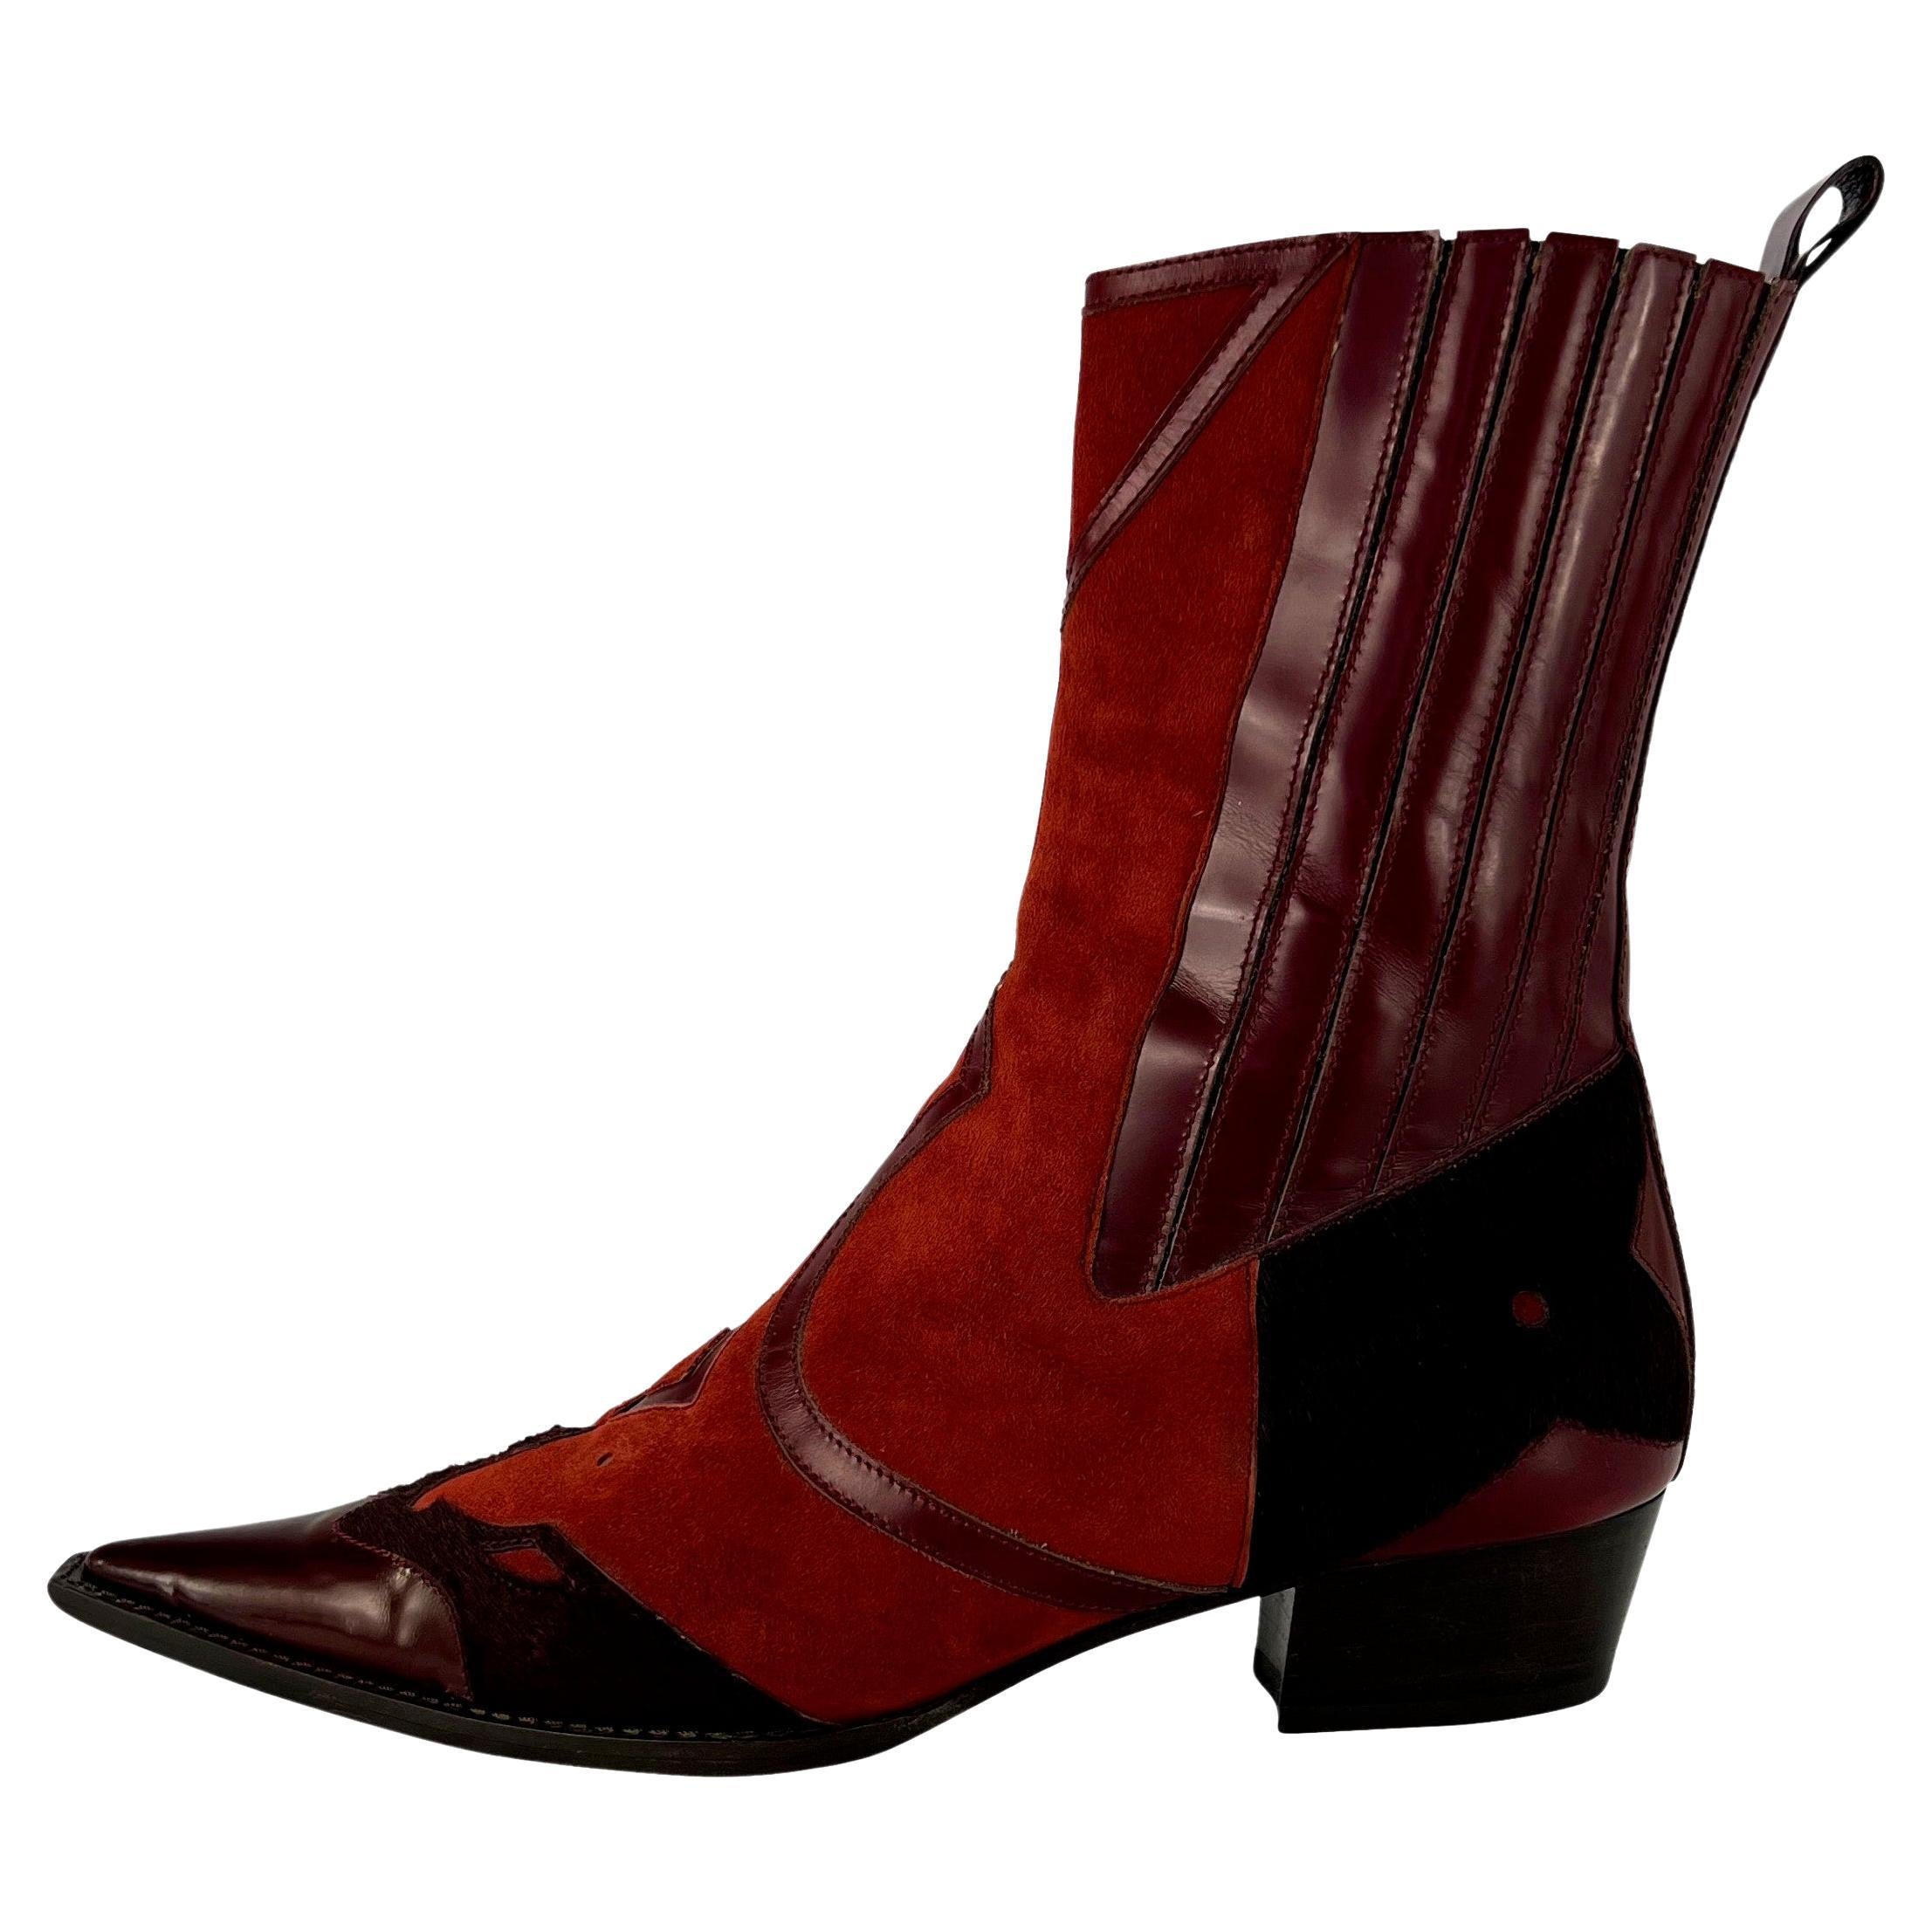 TheRealList presents: a pair of vibrant red and burgundy Dolce and Gabbana cowgirl boots. From the early 2000s, these incredible boots feature a small heel, patent leather toes, burgundy pony hair accents, and Western-style cutouts. 

Follow us on